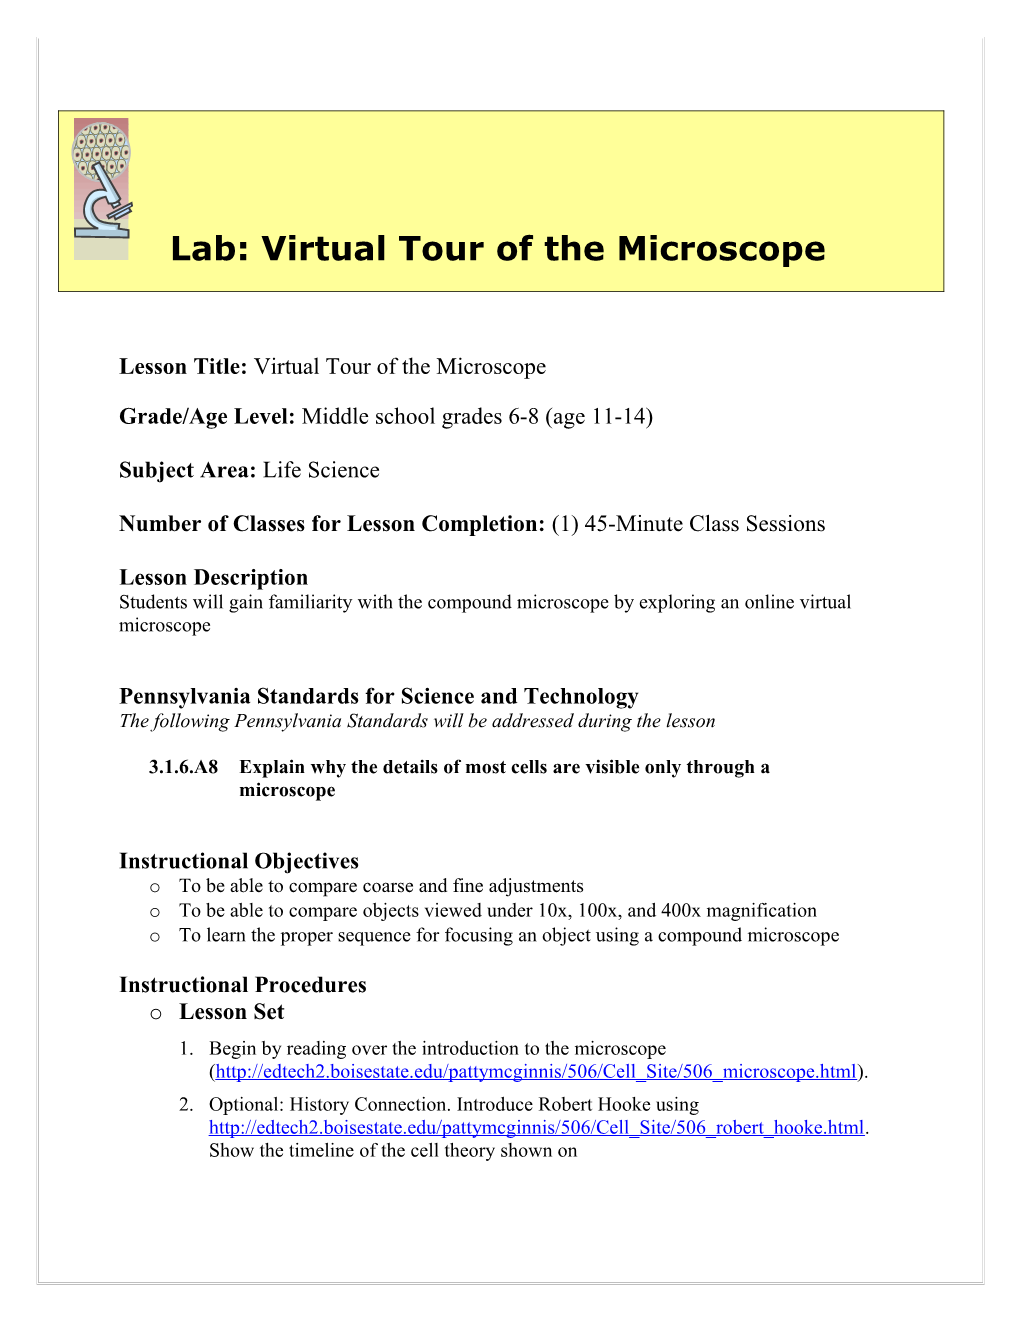 Lab: Virtual Tour of the Microscope